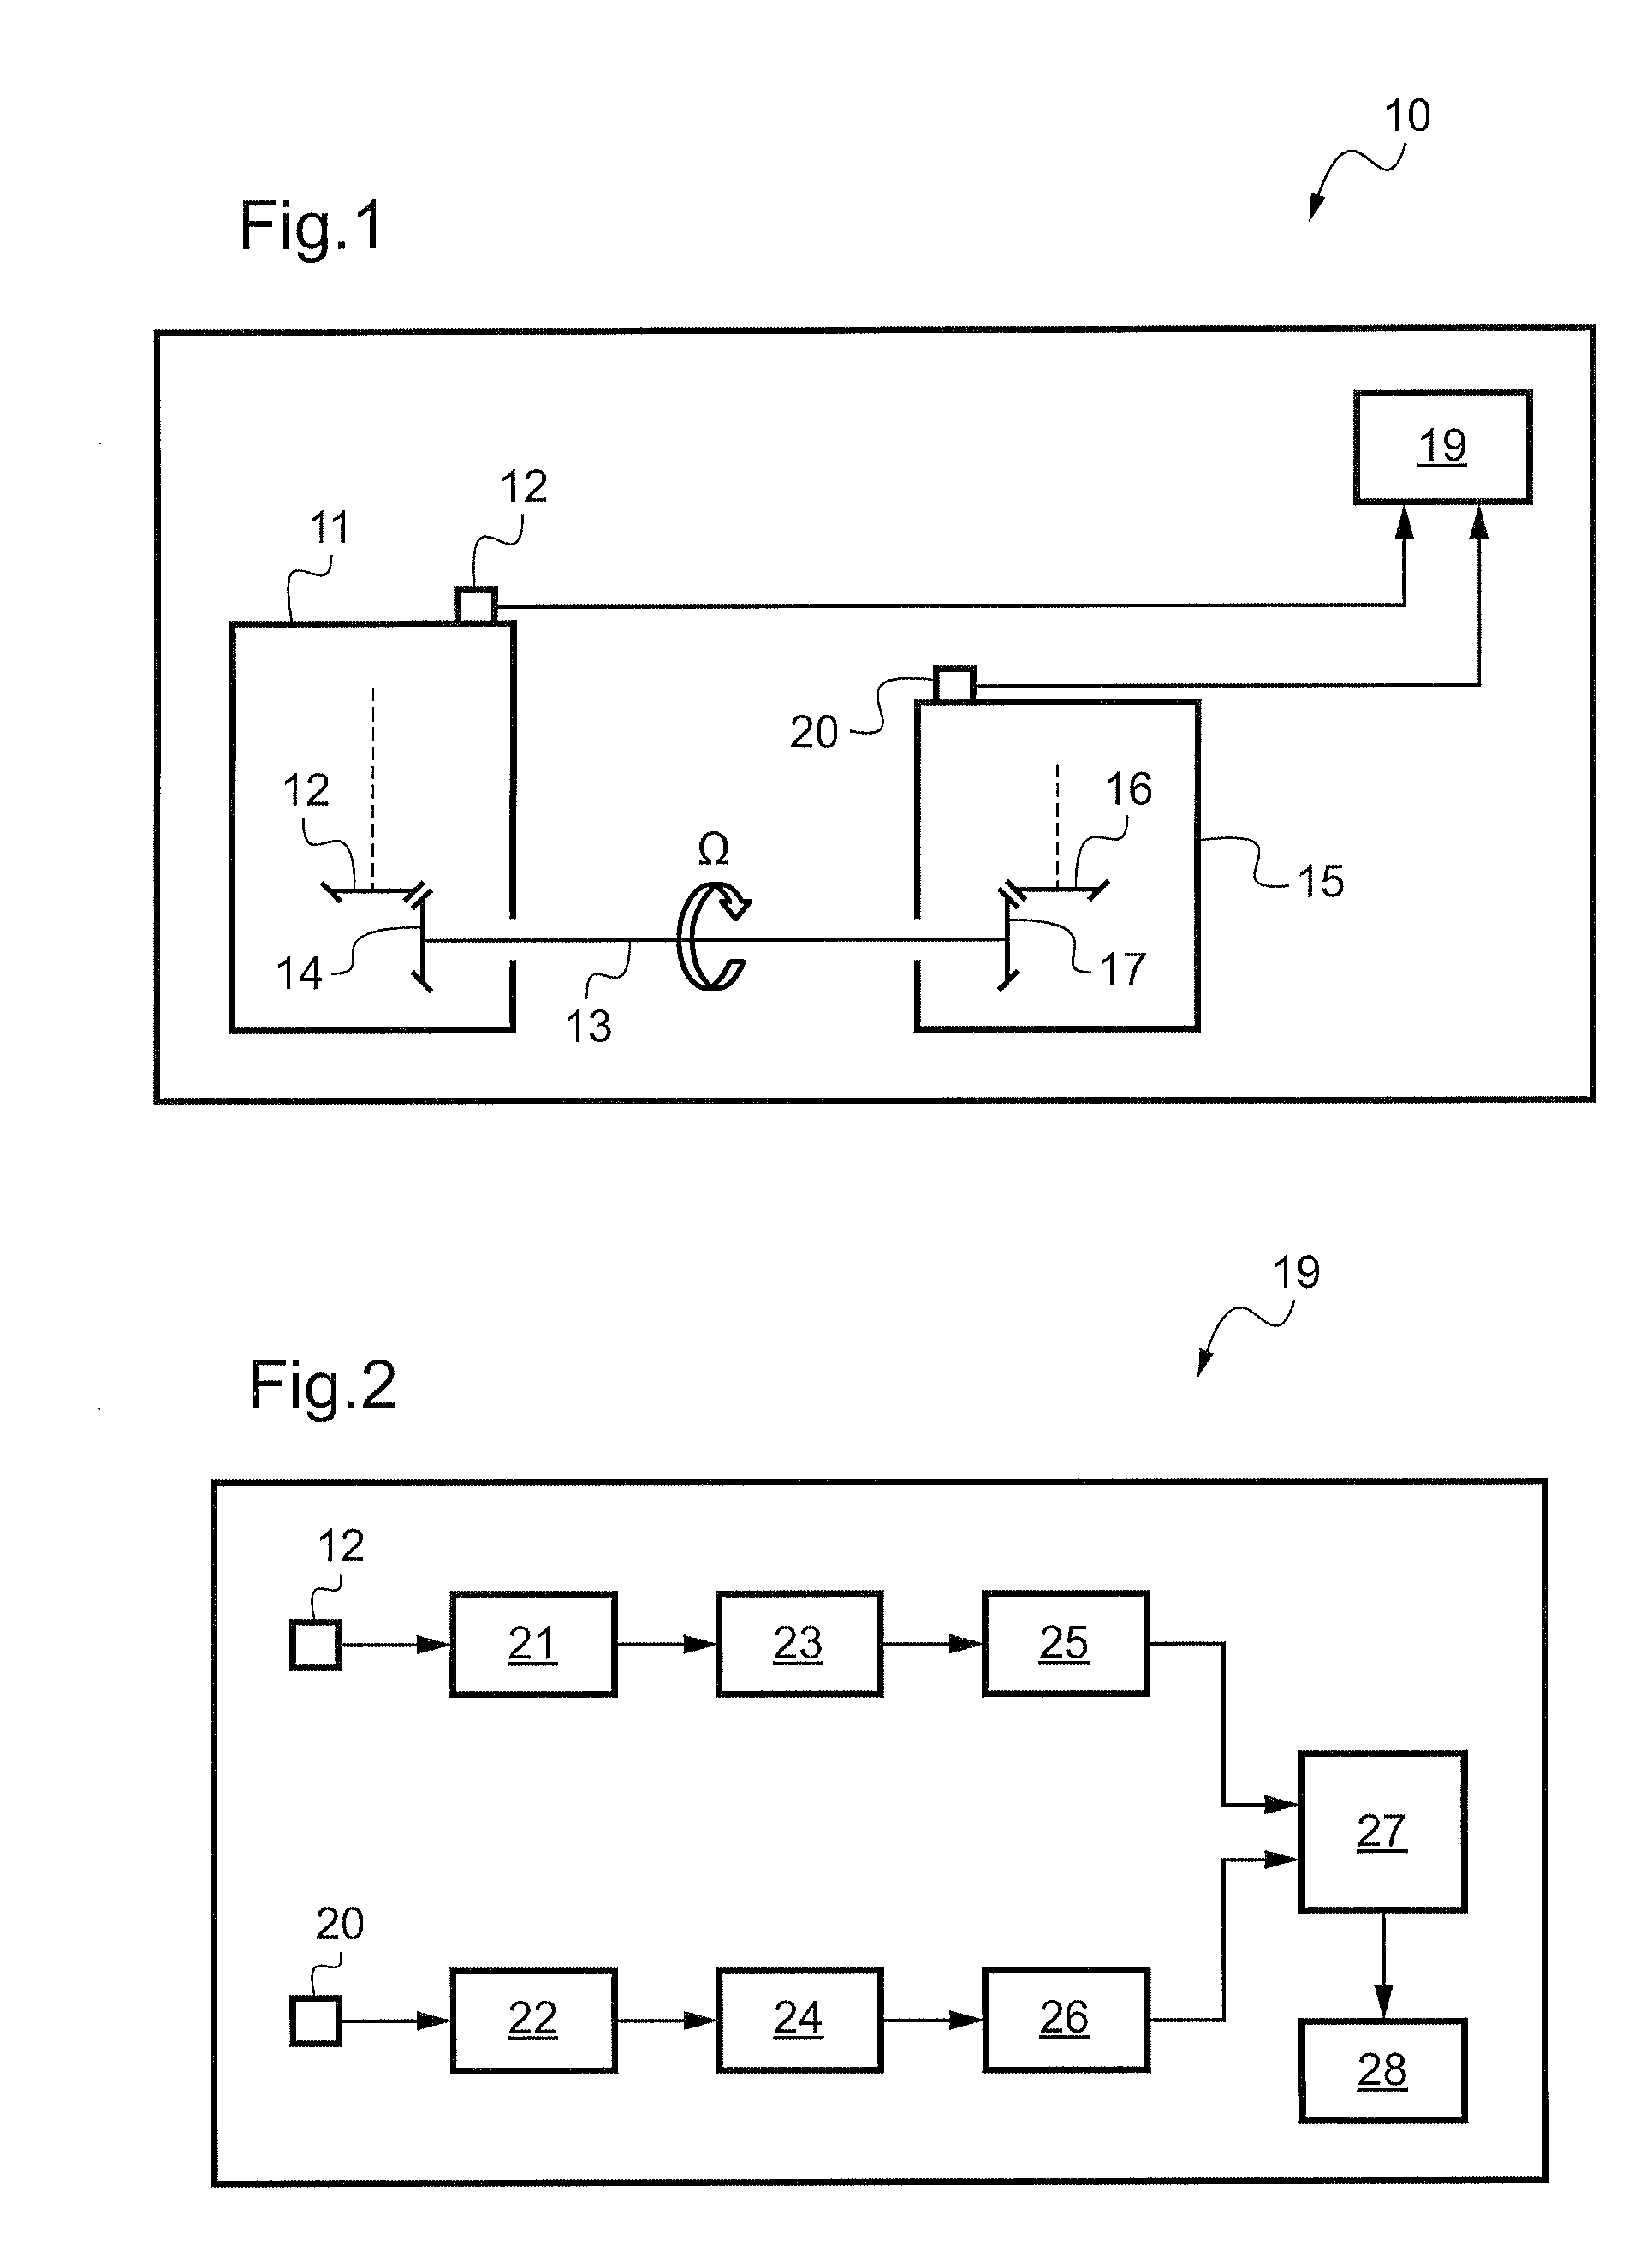 Method of measuring torque and torque measuring system for said method